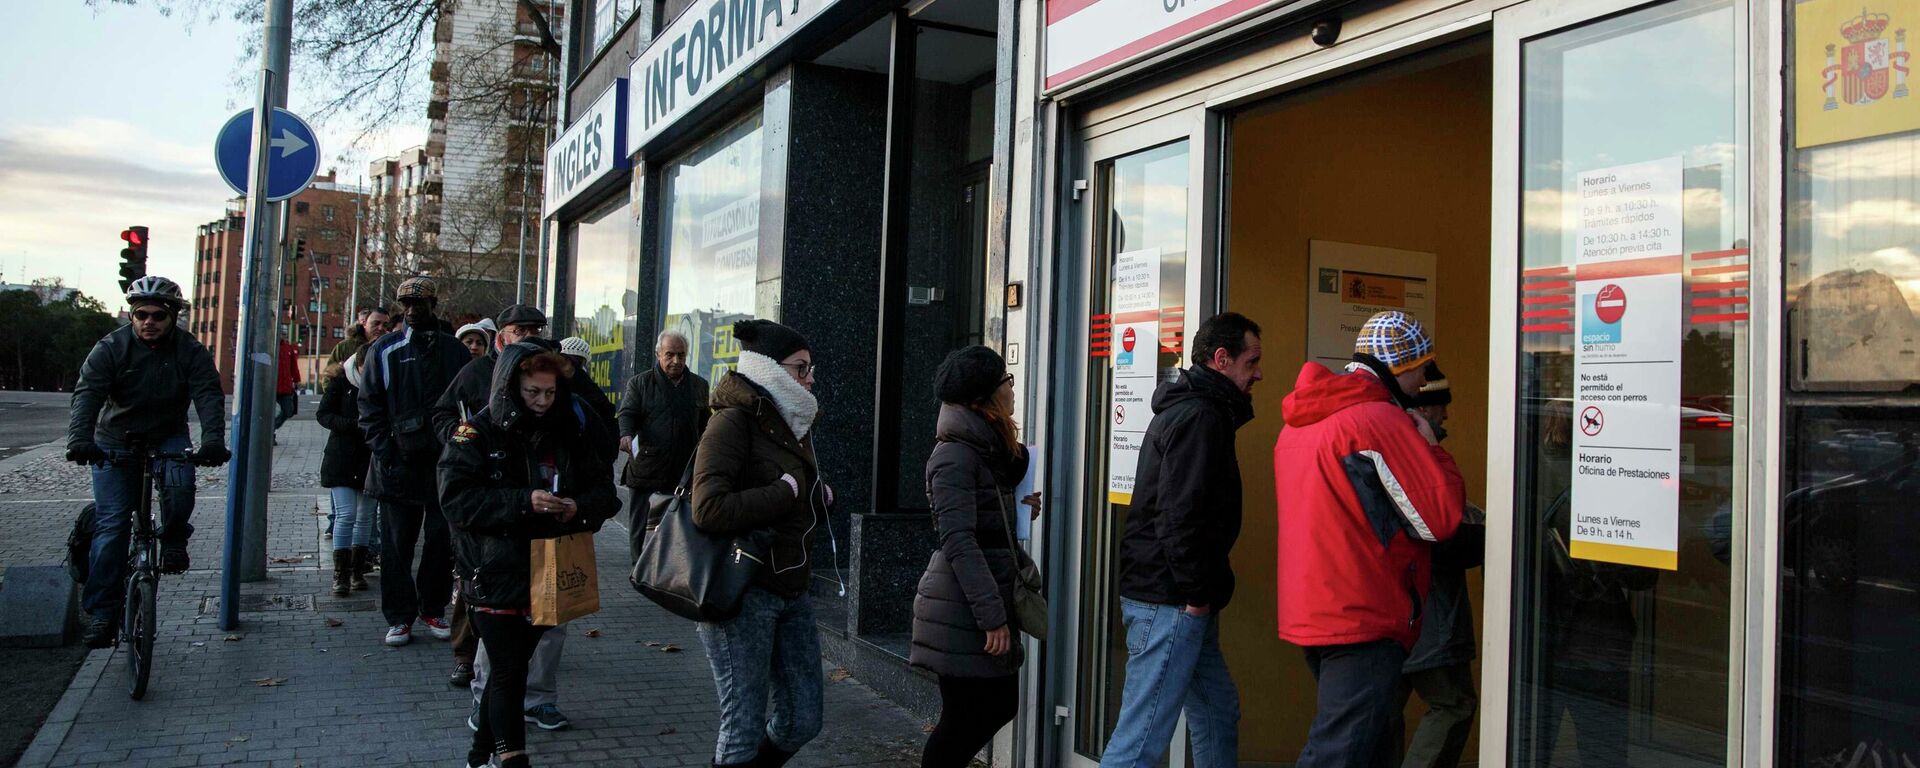 People enter a government-run employment office in Madrid January 22, 2015 - Sputnik Mundo, 1920, 02.12.2021